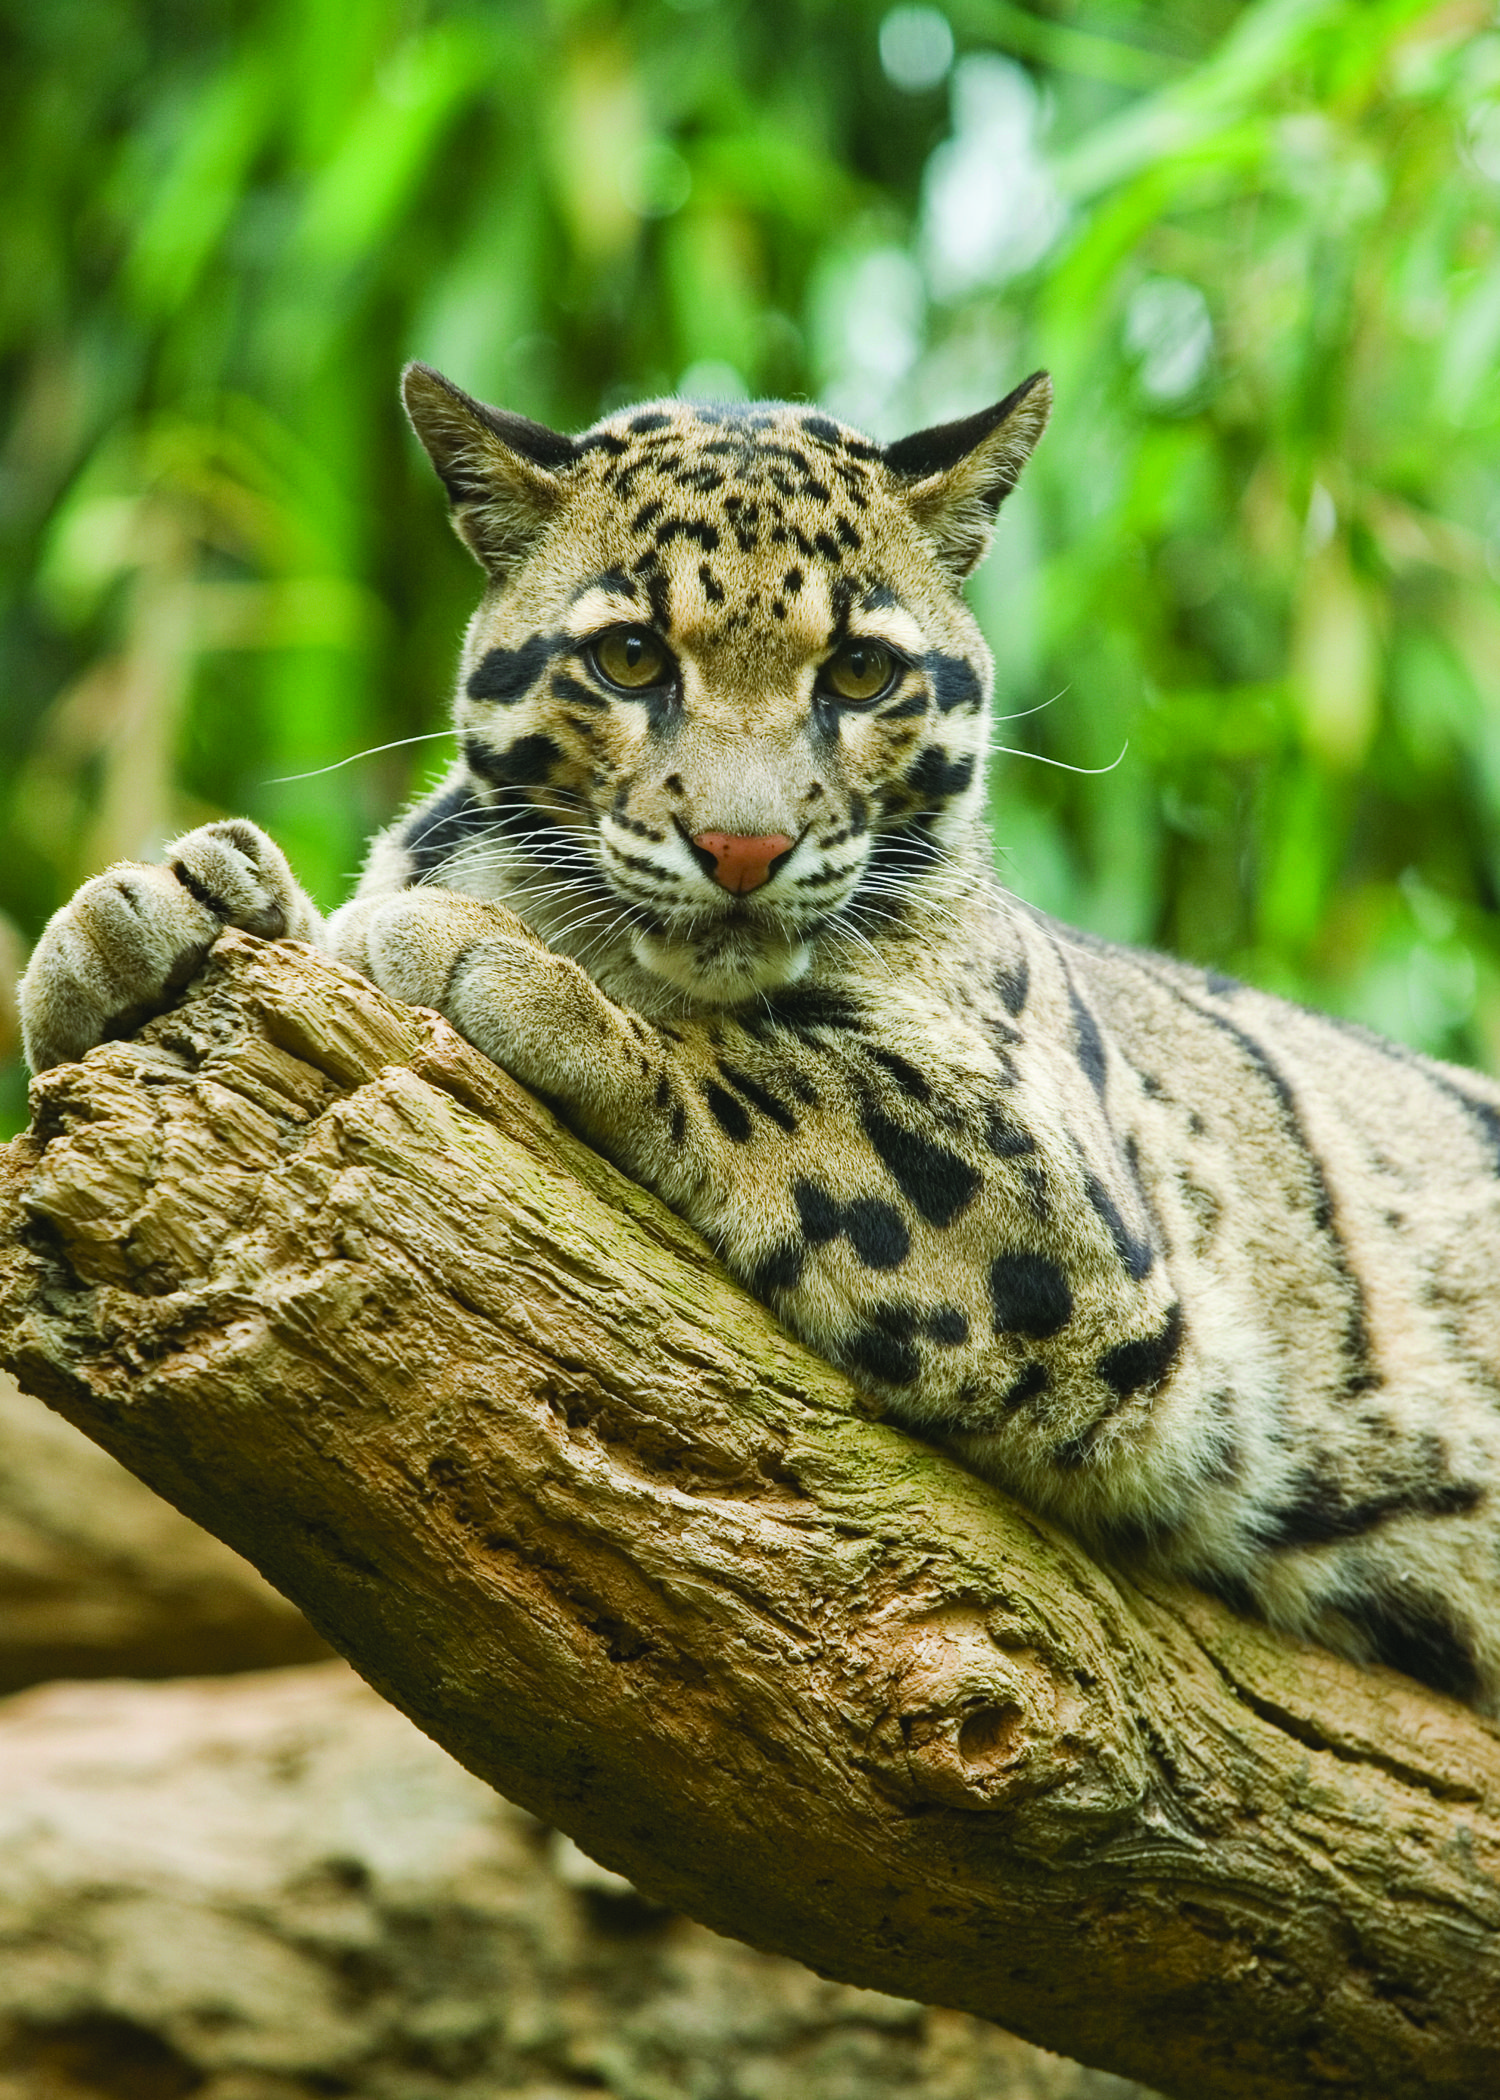 Adopt a Clouded Leopard Adoption and Gift Center